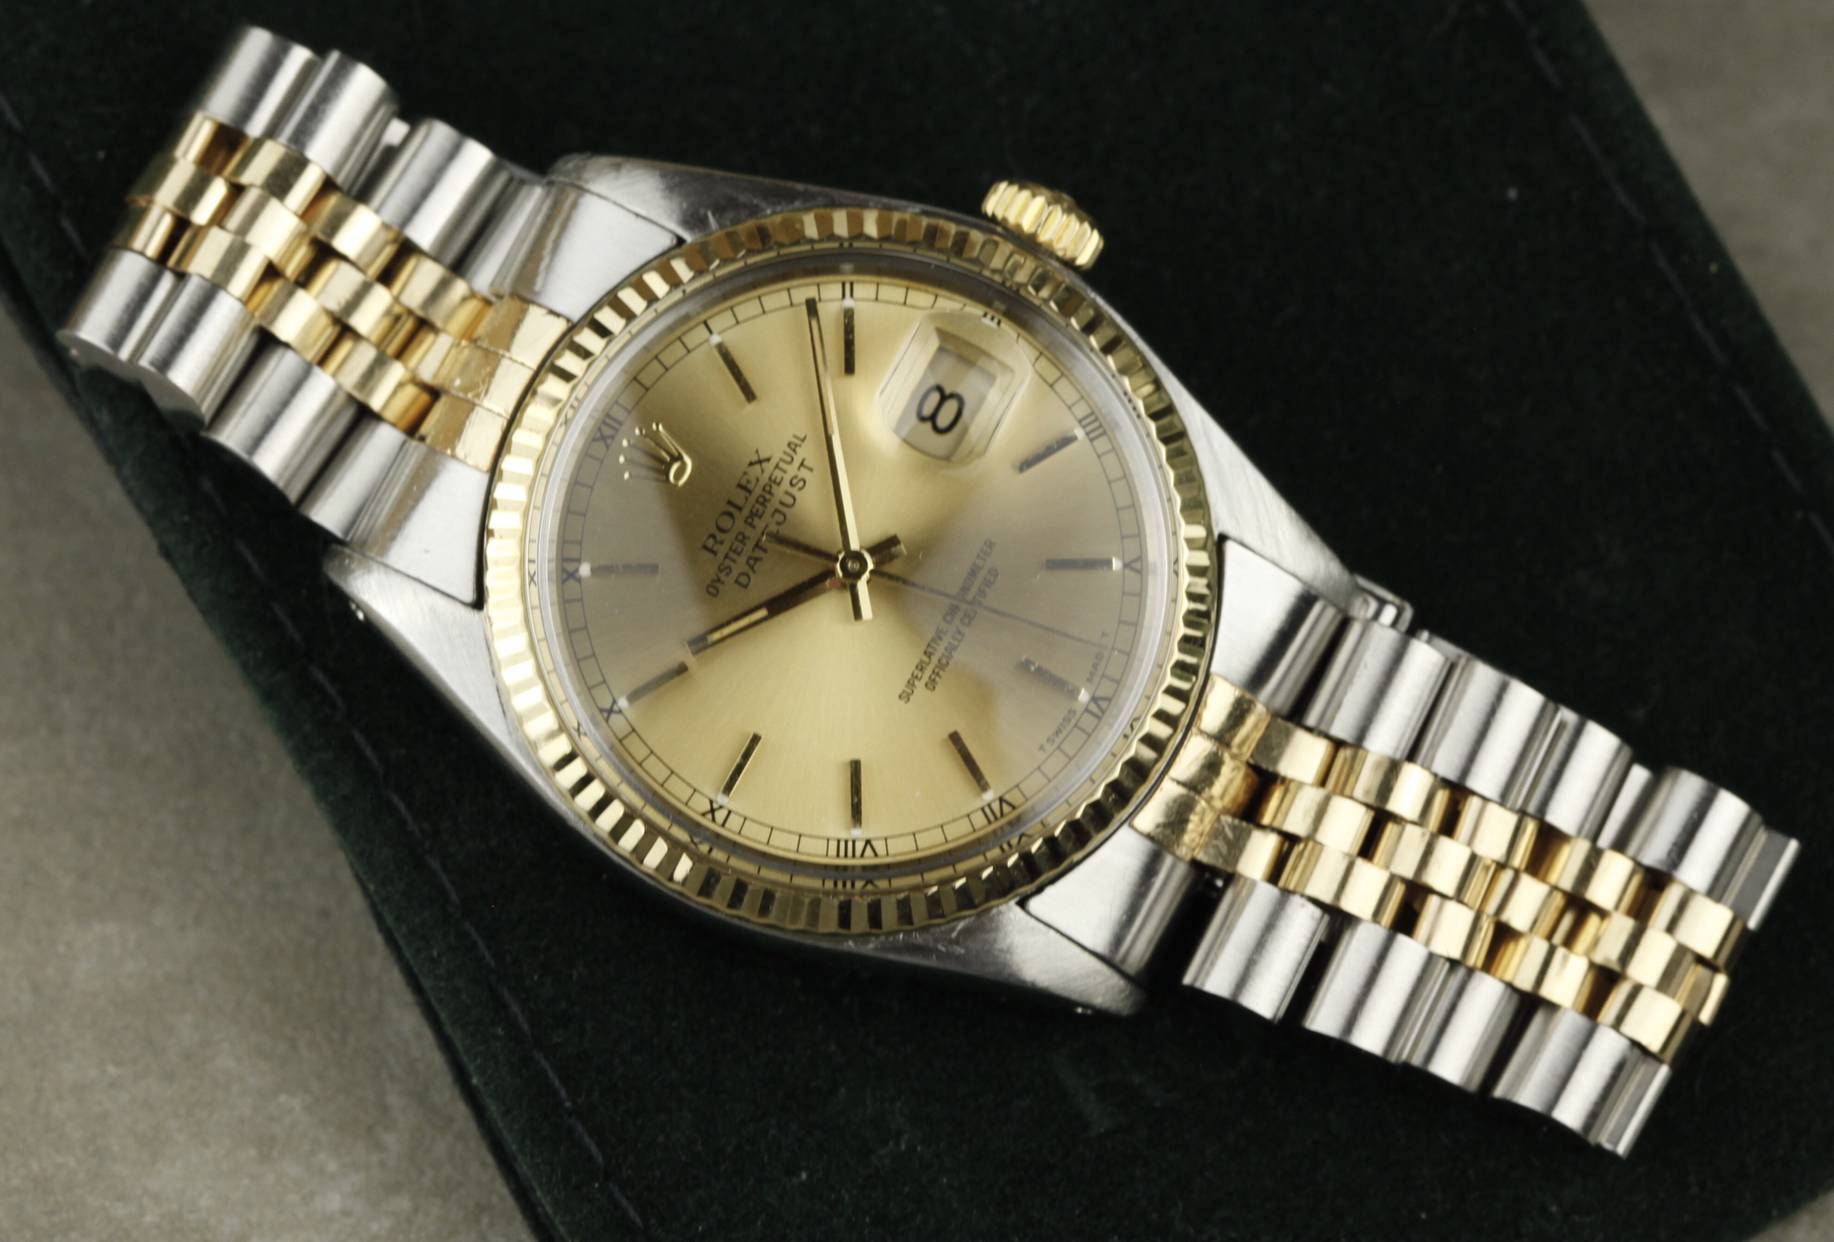 1978 rolex oyster perpetual datejust